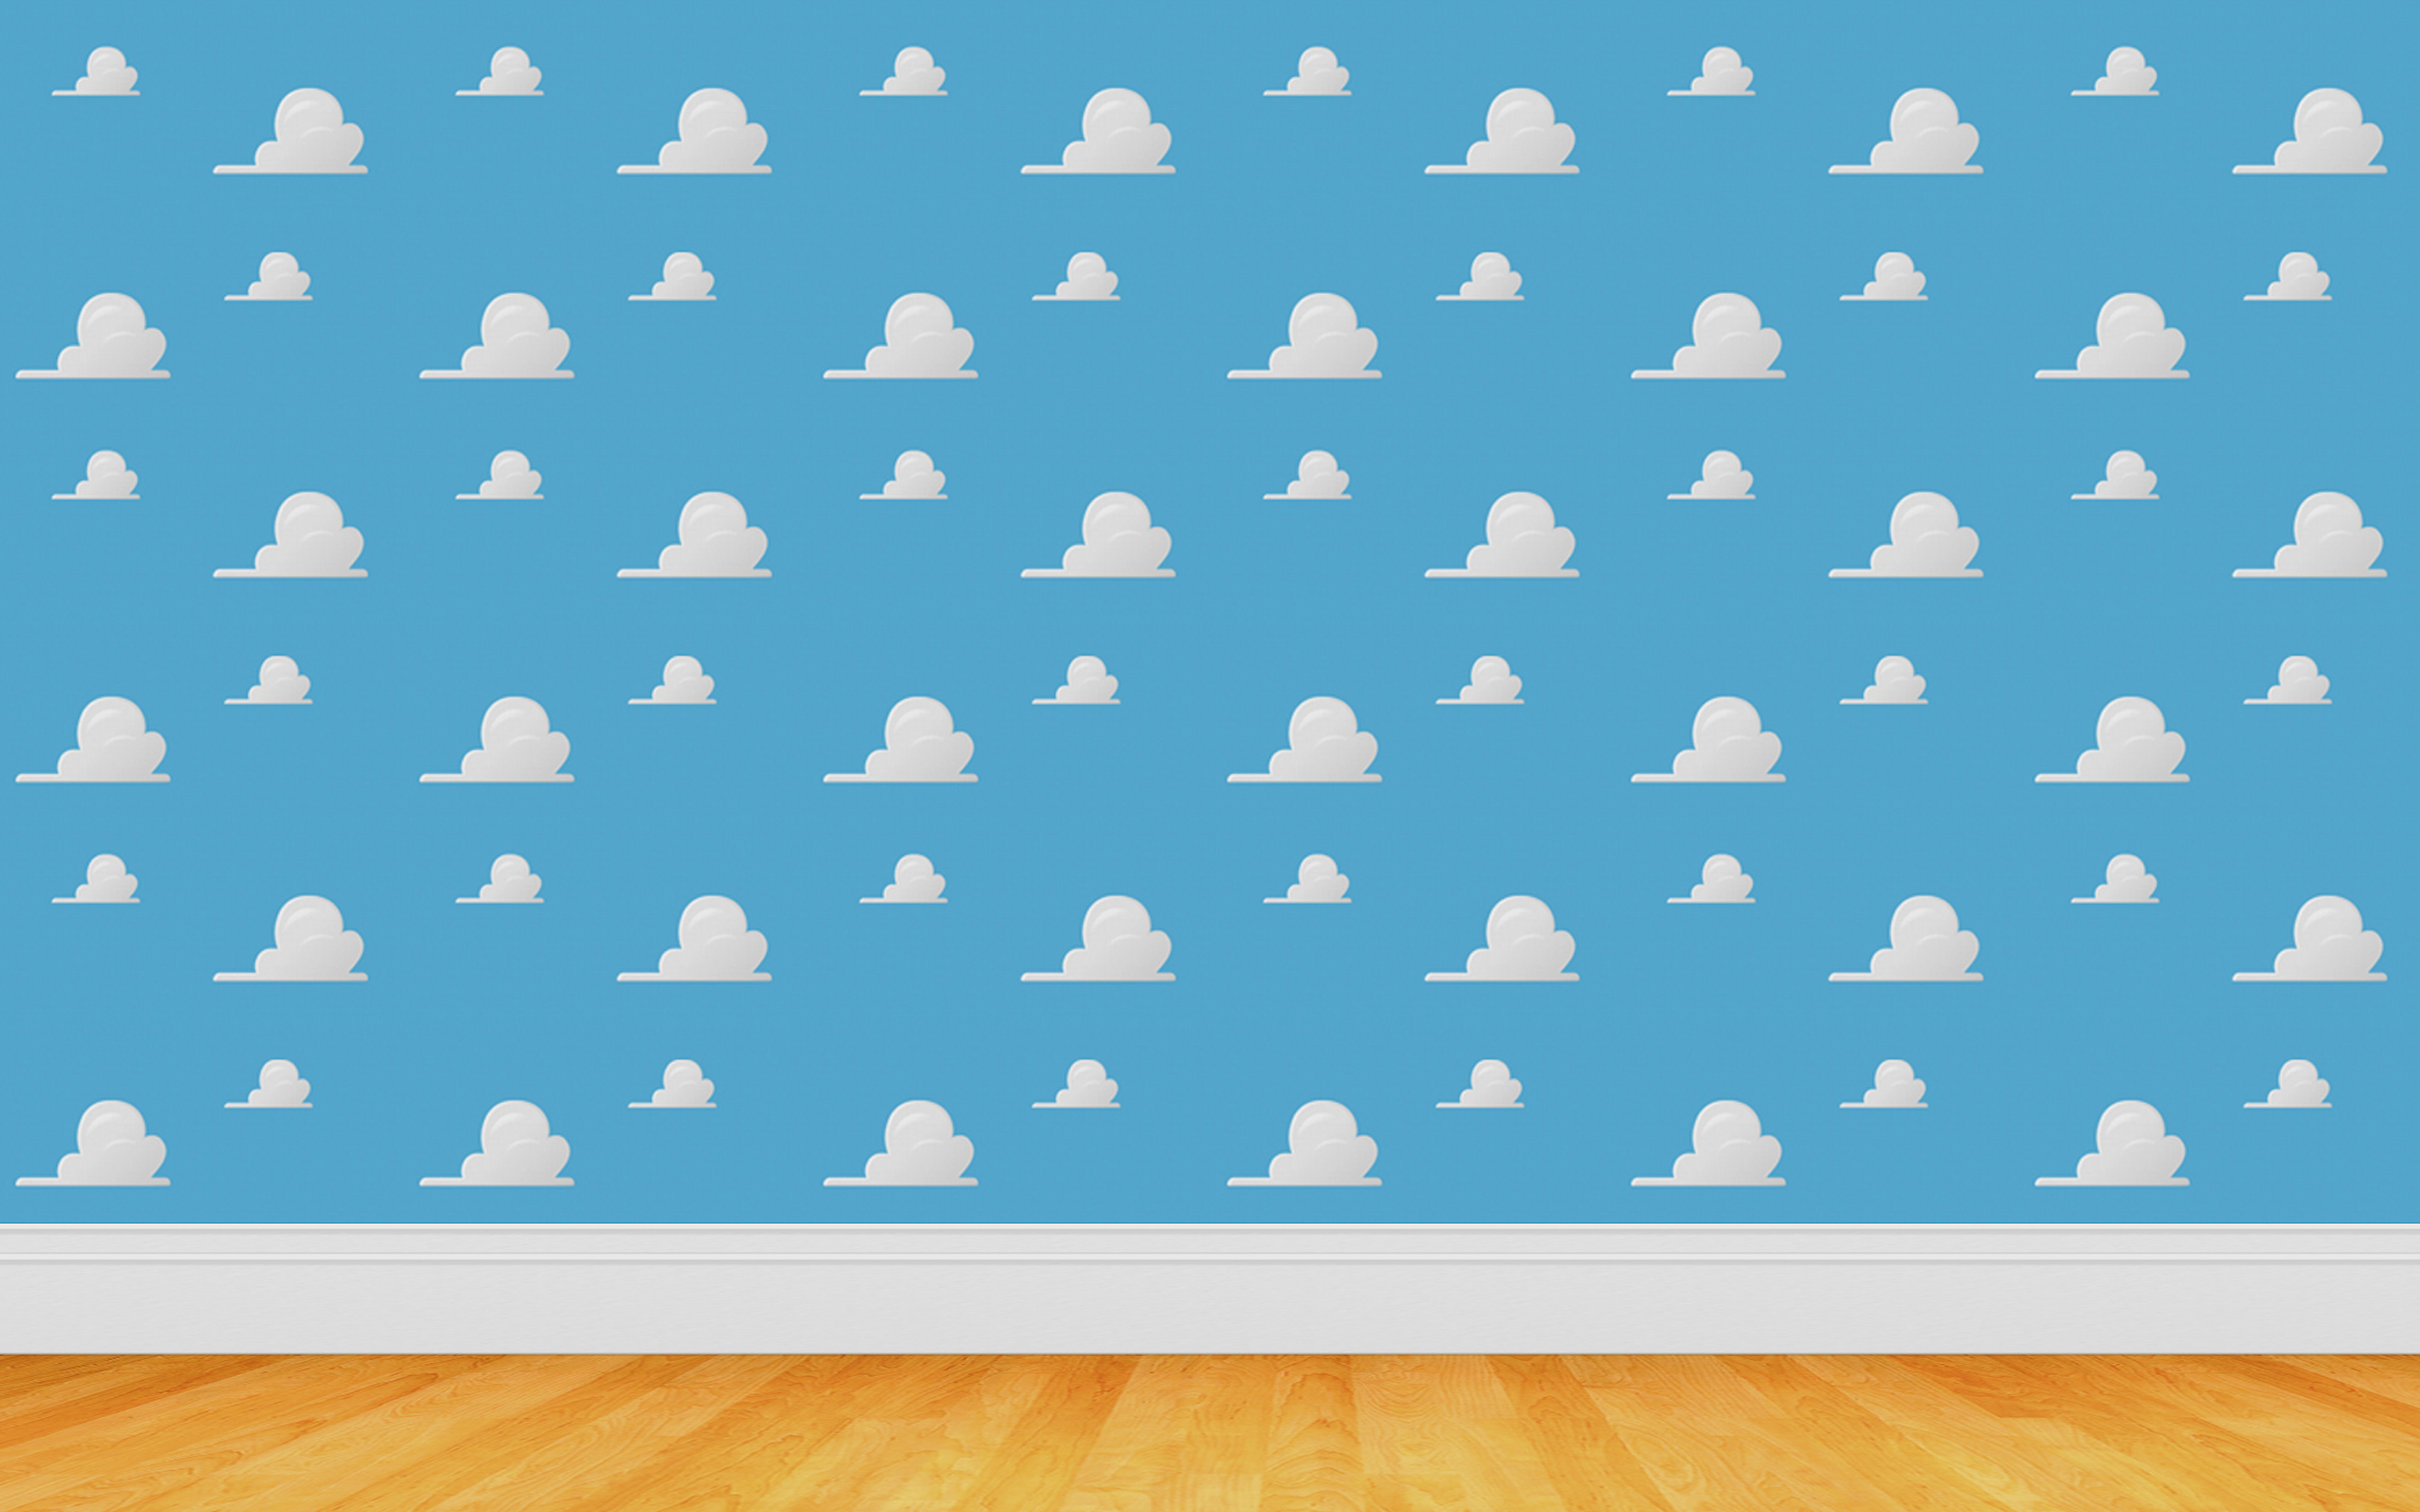 Toy Story Clouds Wallpaper Background 3859 3840x2400 - uMad.com